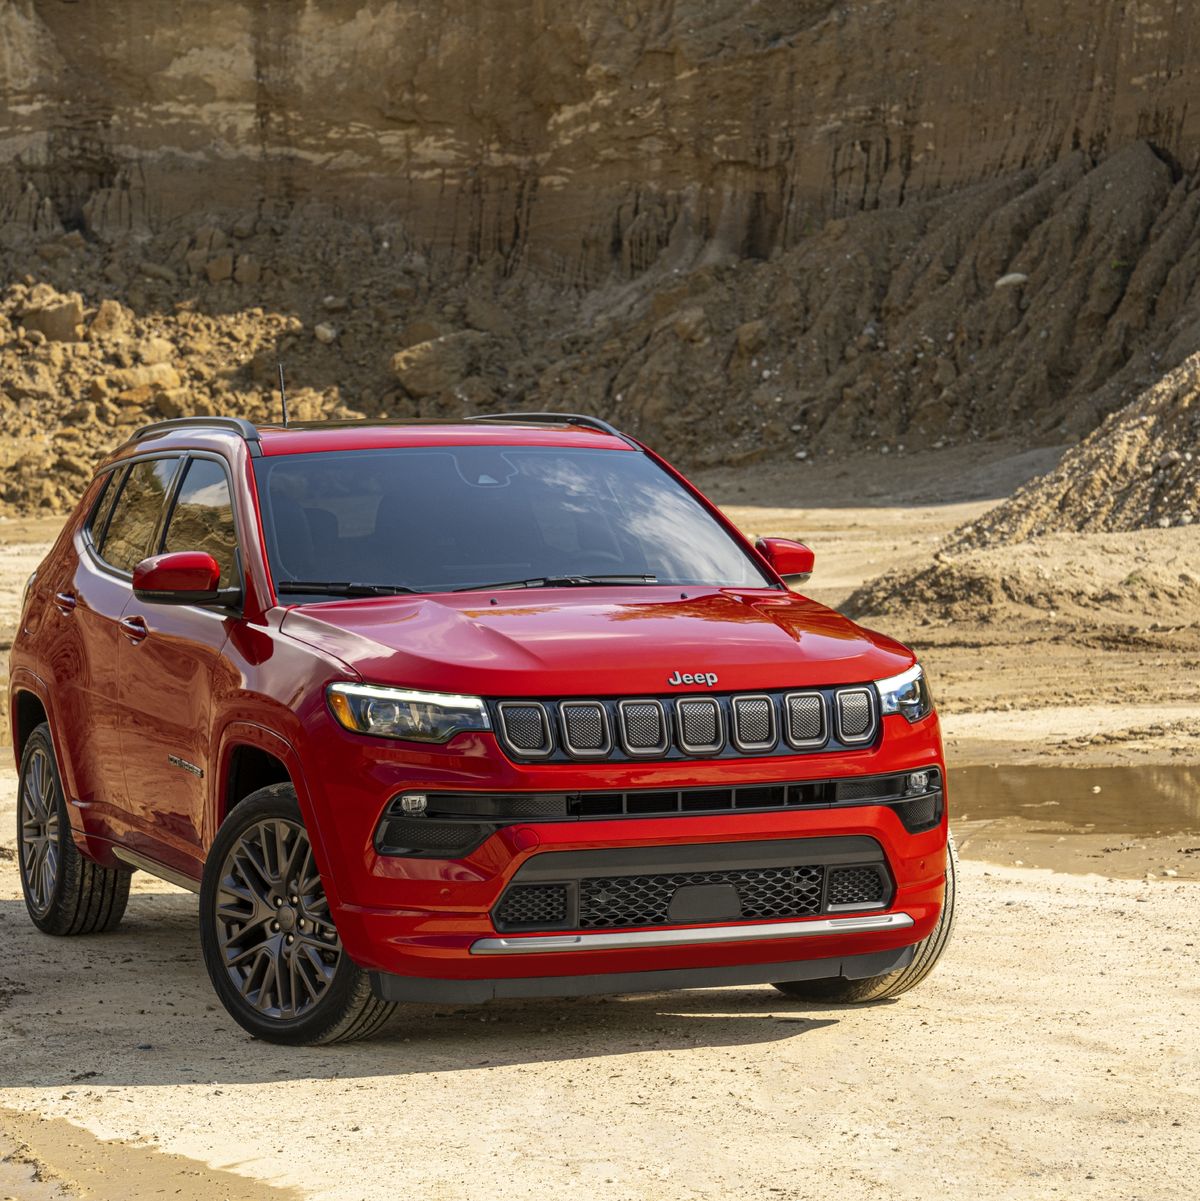 2023 Jeep® Compass Capabilities - Trailhawk 4x4 Systems